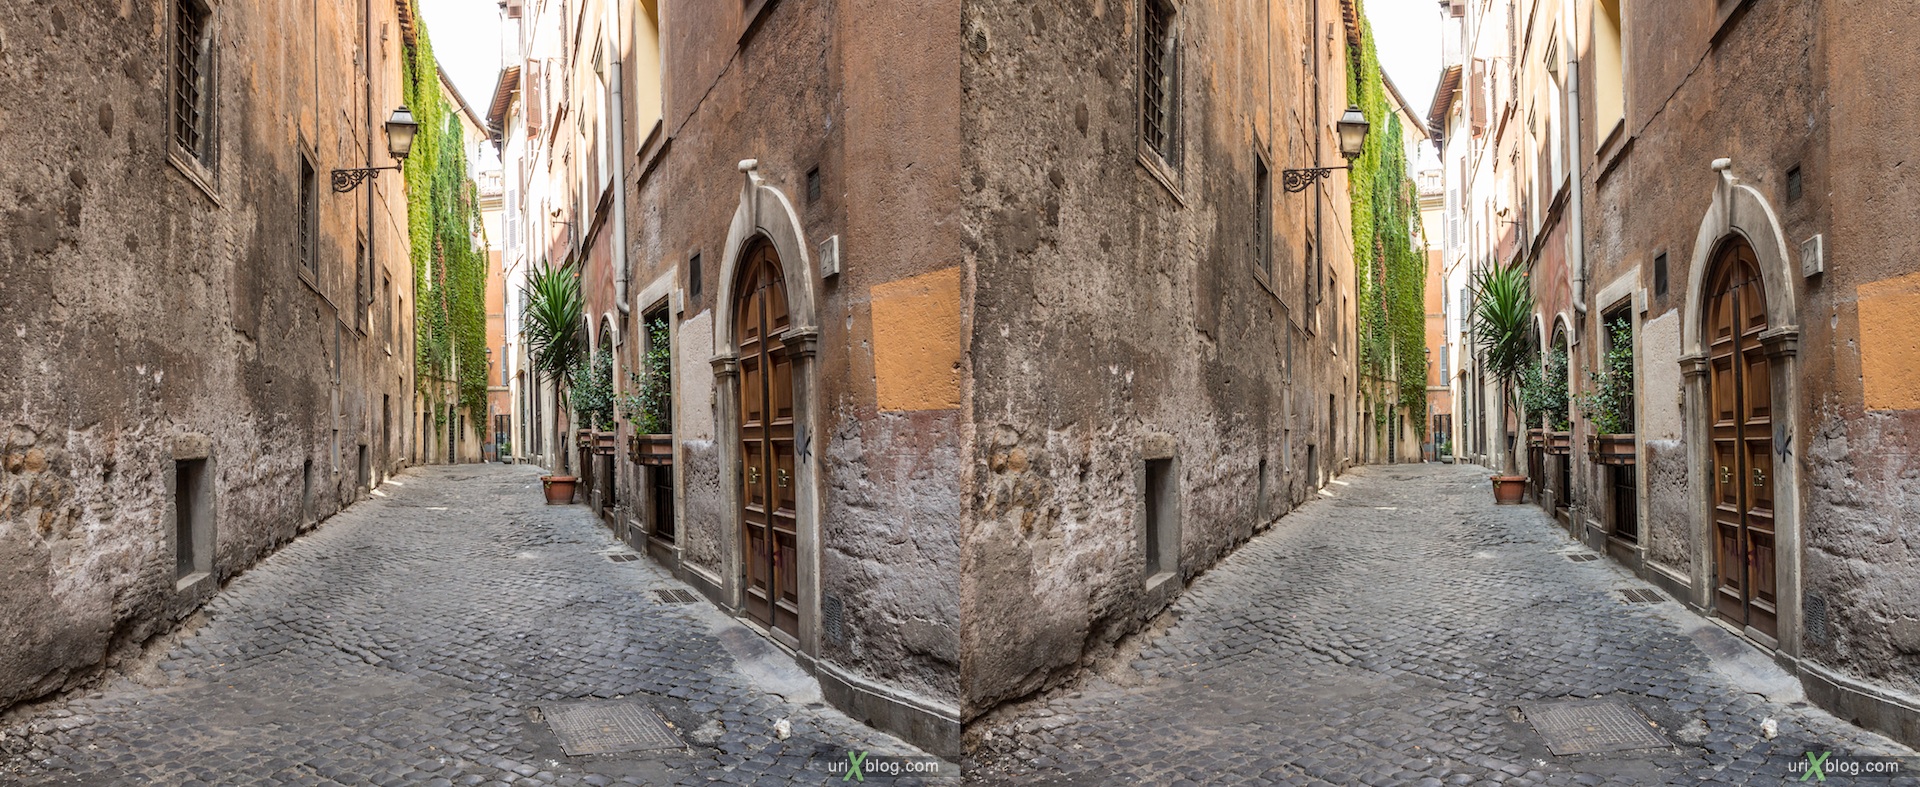 2012, vicolo della Volpe street, 3D, stereo pair, cross-eyed, crossview, cross view stereo pair